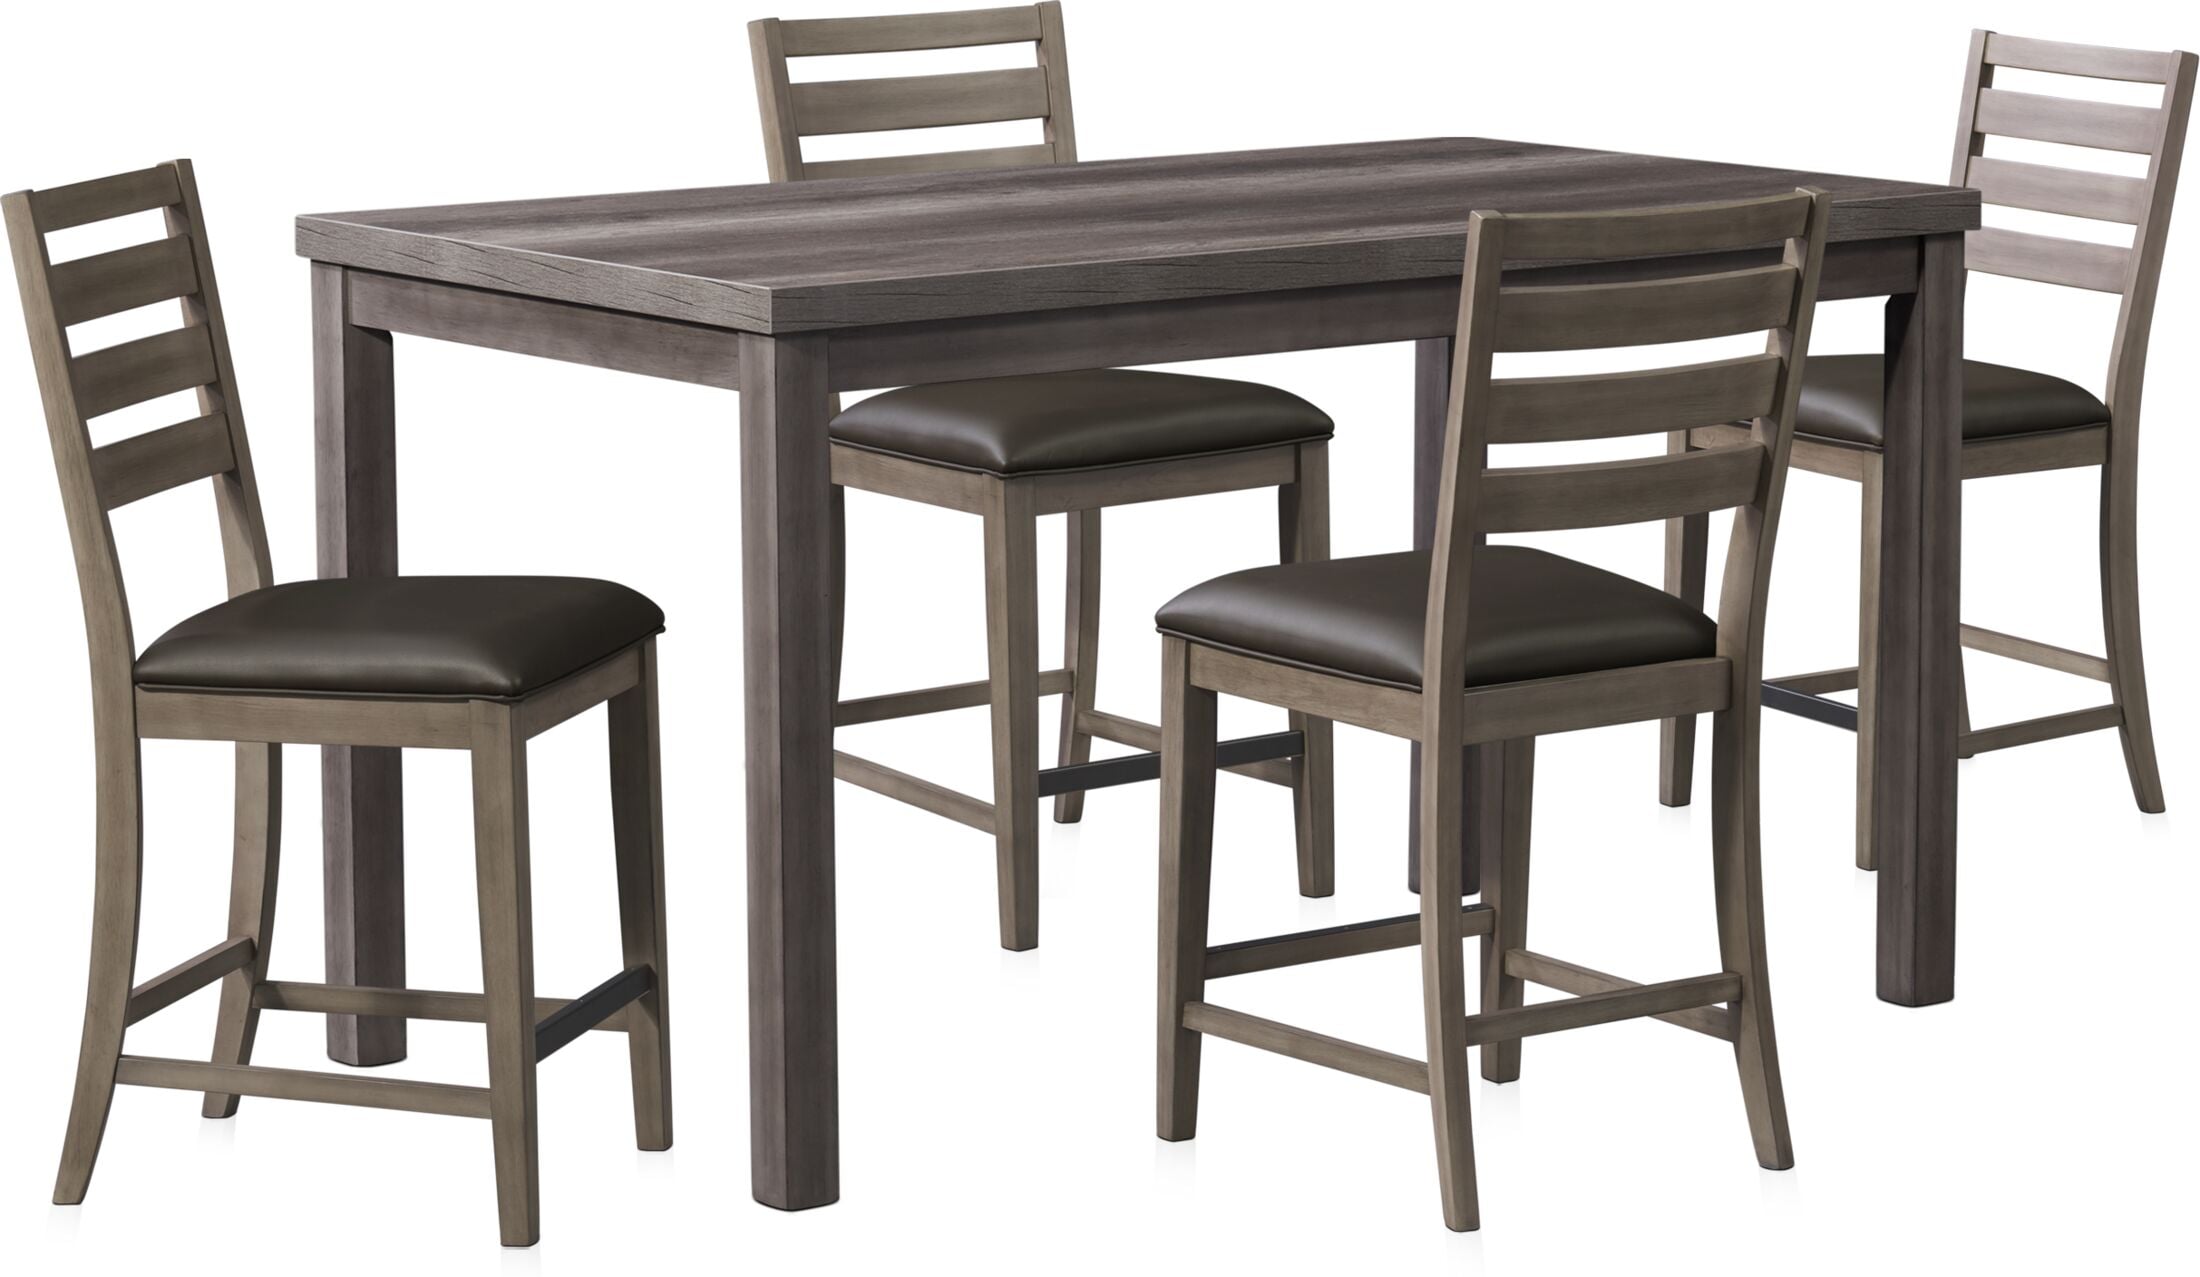 The Fairfield Dining Collection, Value City Dining Table And Chairs